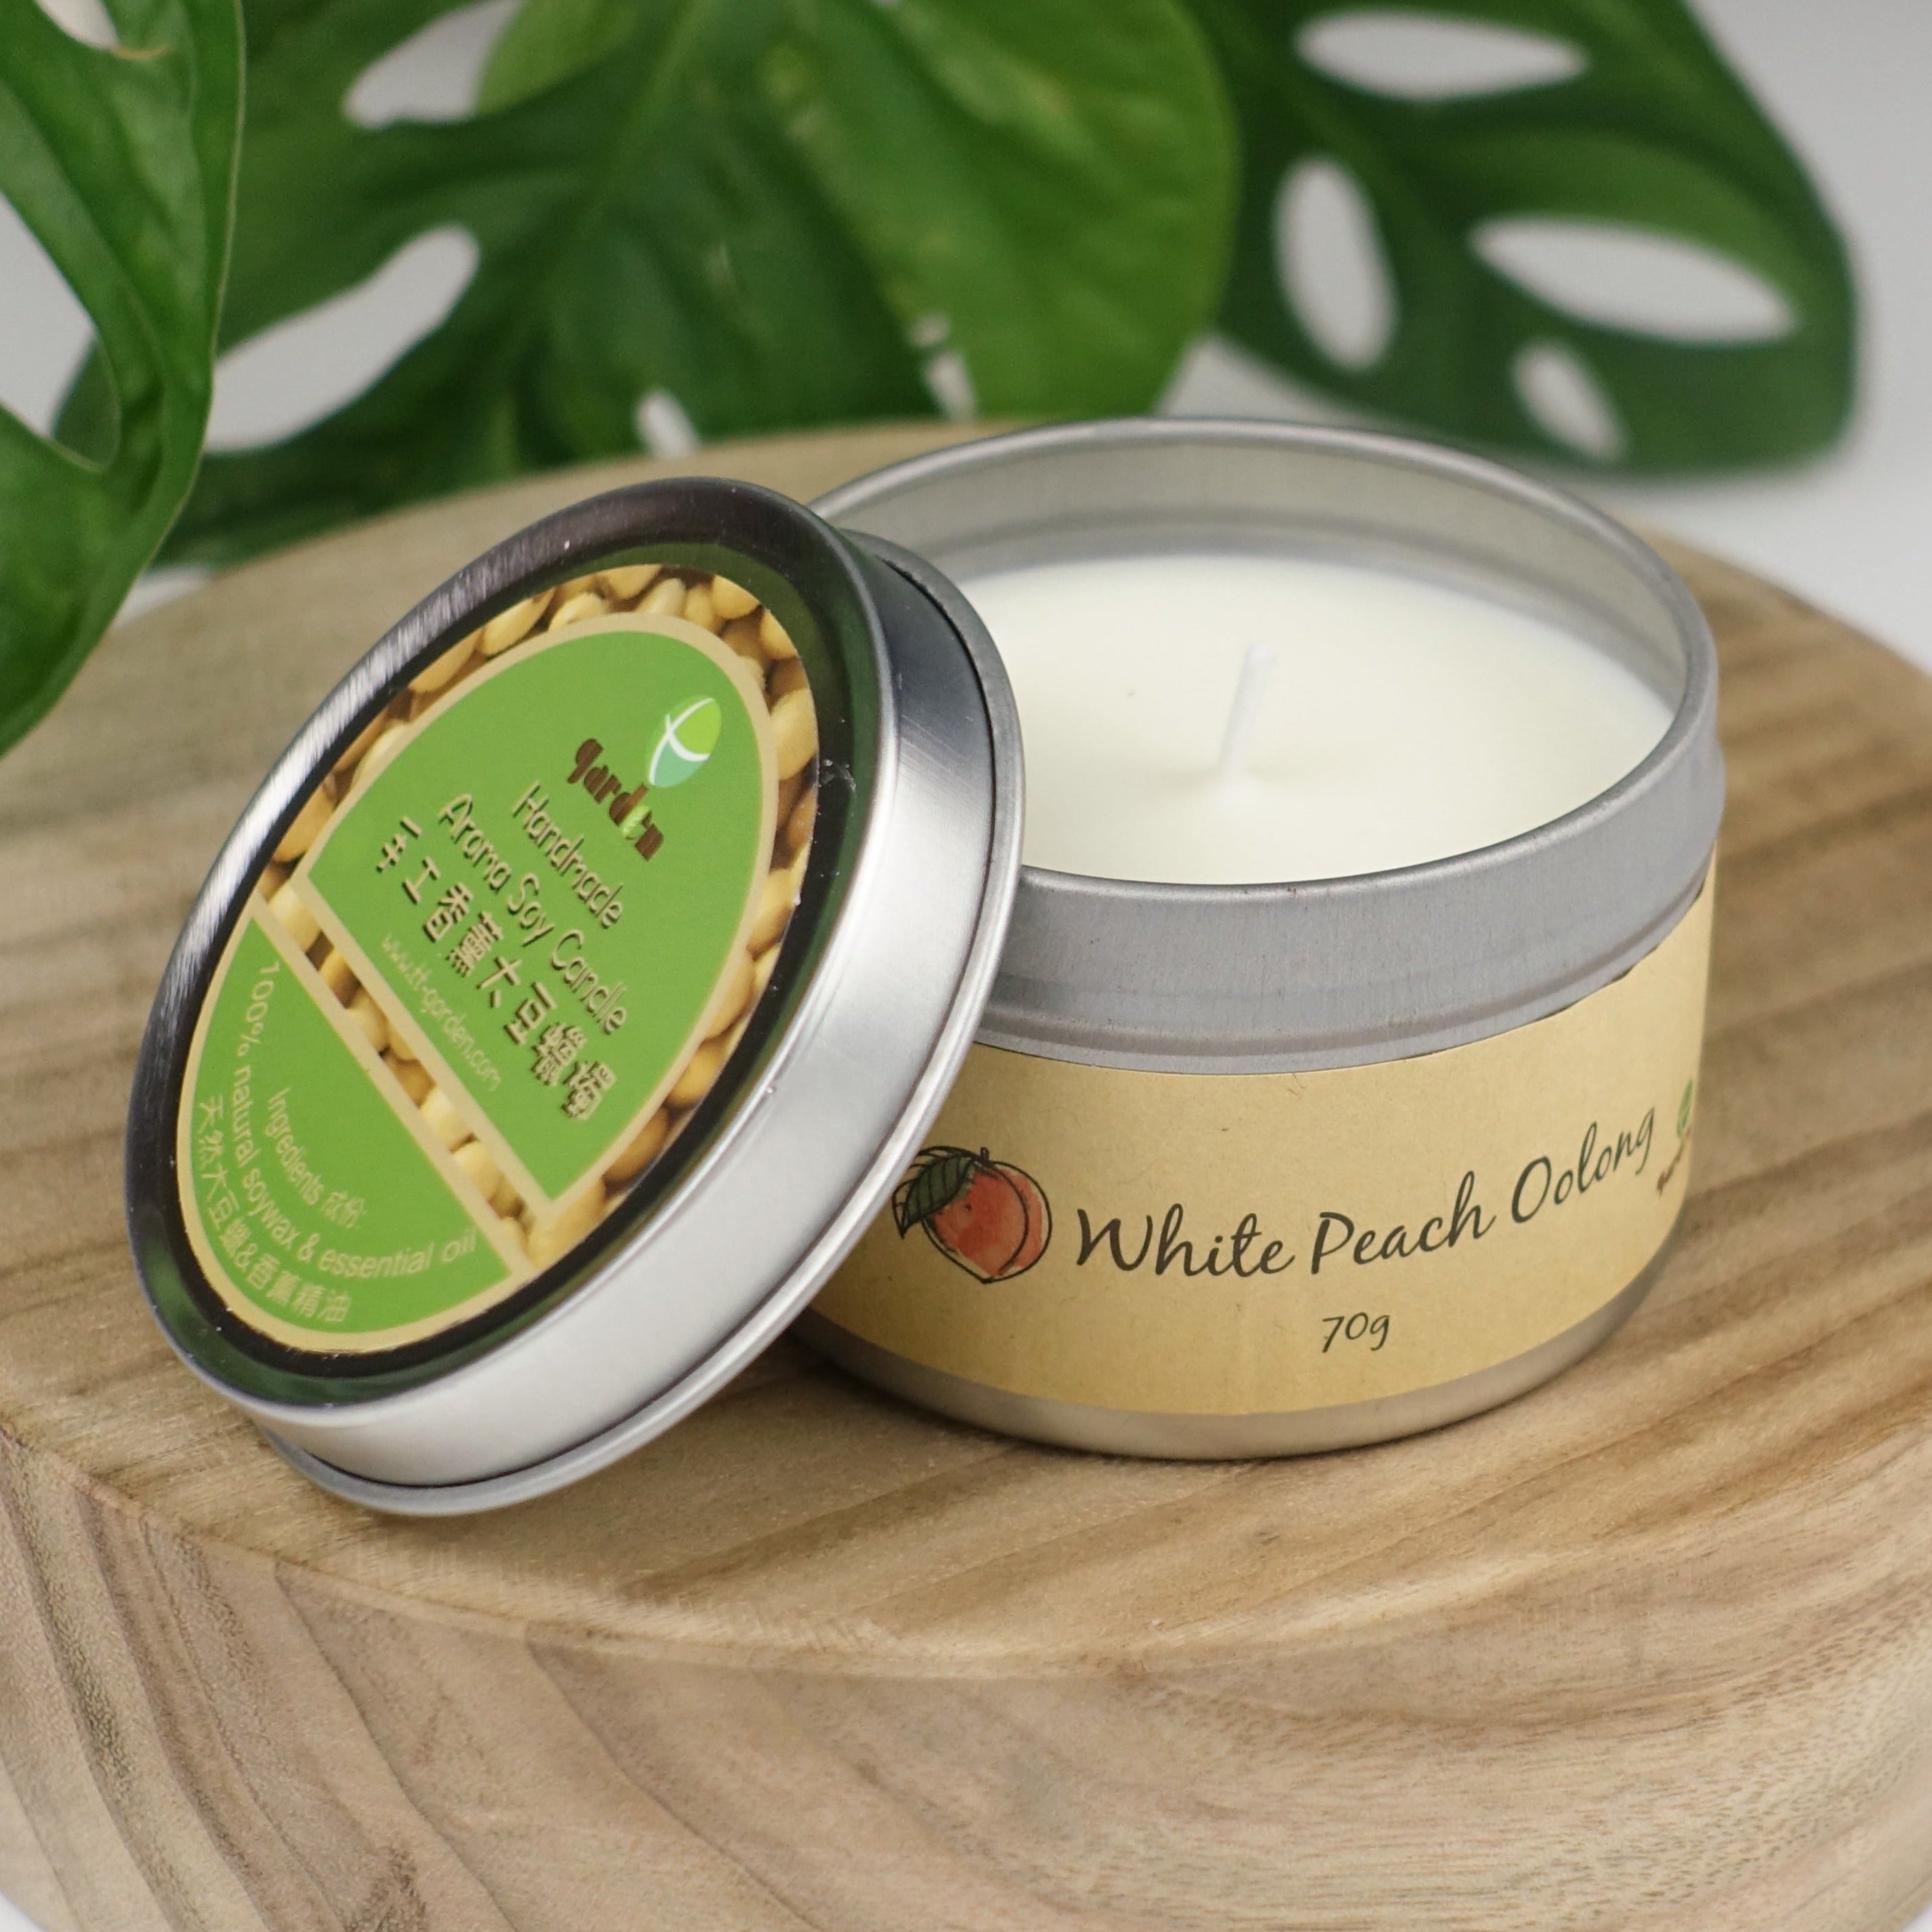 Aroma Candle Natural Handmade Soywax Candle Charmed Aroma Home